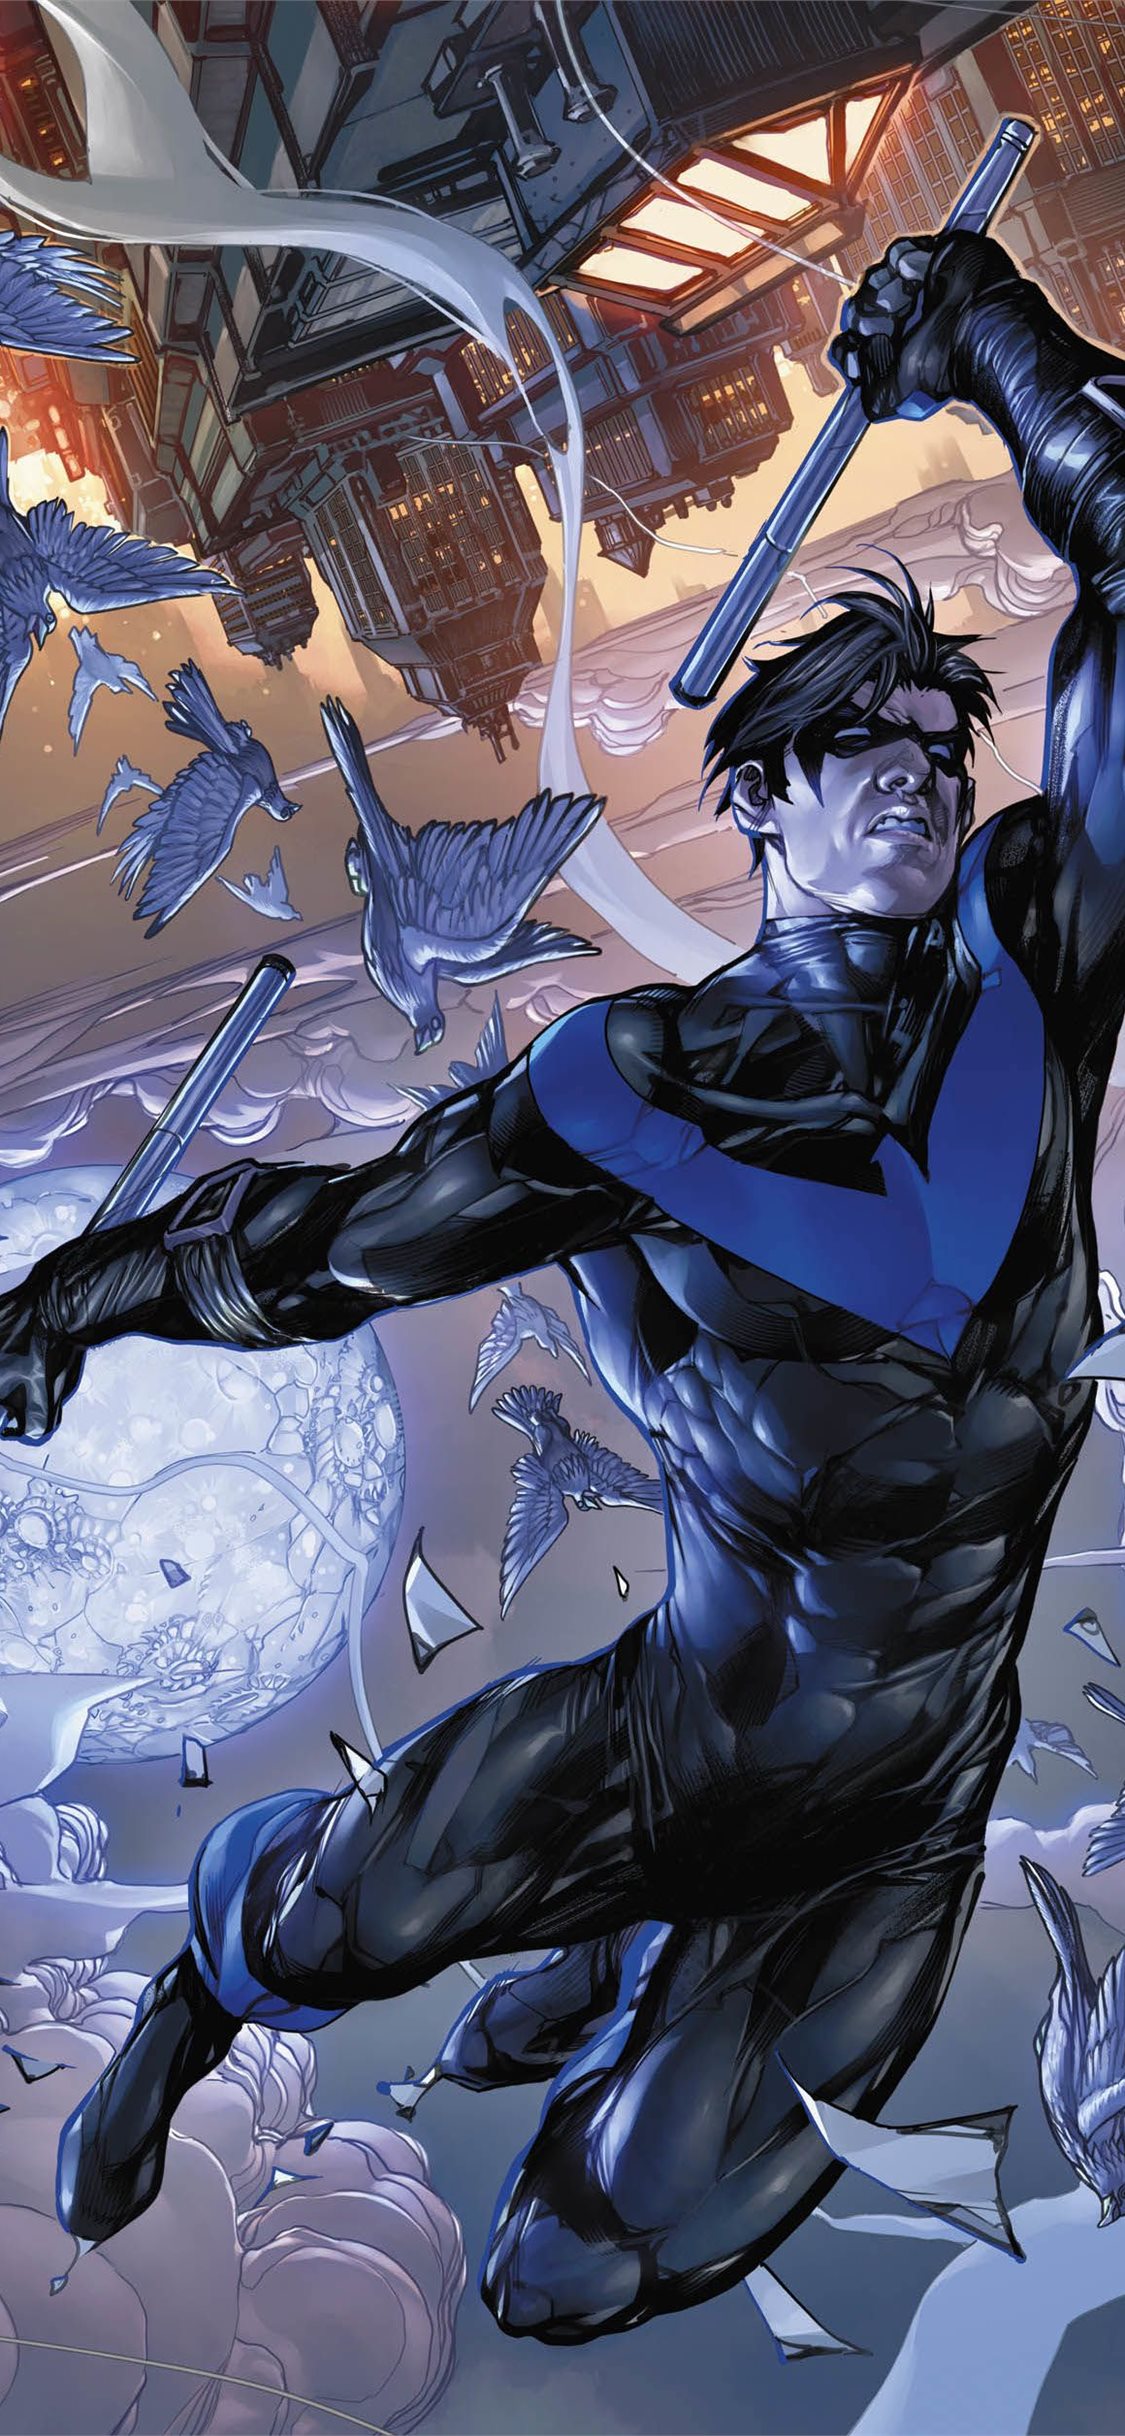 Download this Wallpaper iPhone 6  ComicsNightwing 750x1334 for all your  Phones and Tablets  Nightwing wallpaper Nightwing Dc comics wallpaper